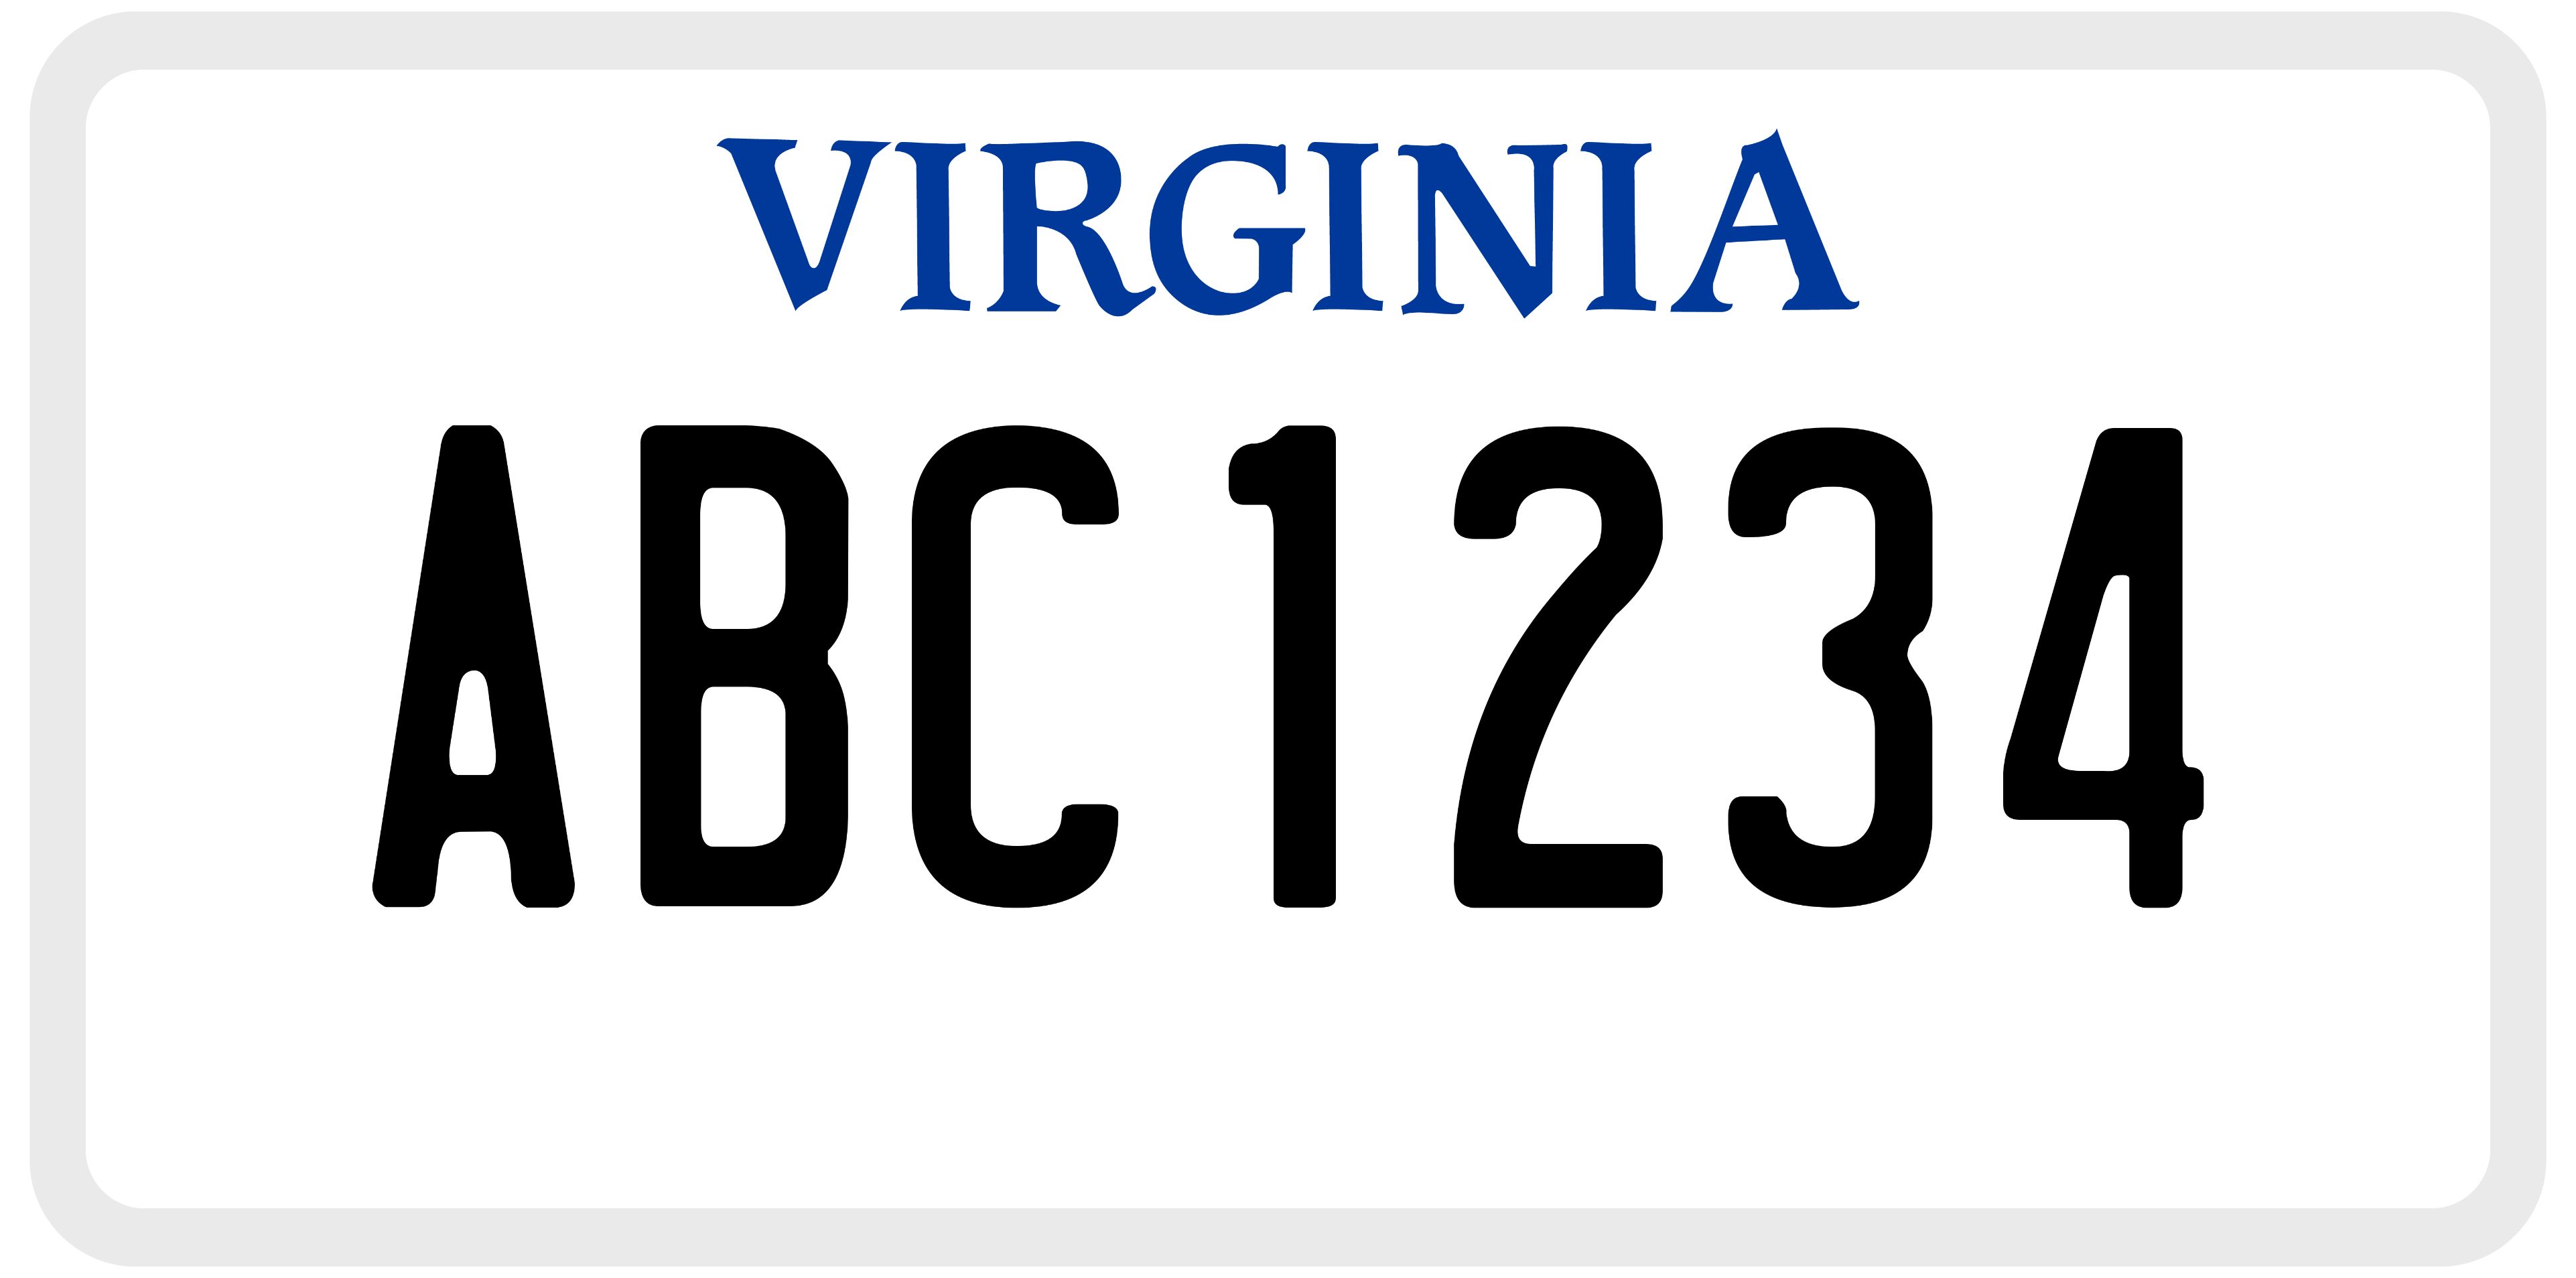 how does a standard Virginia license plate look like?